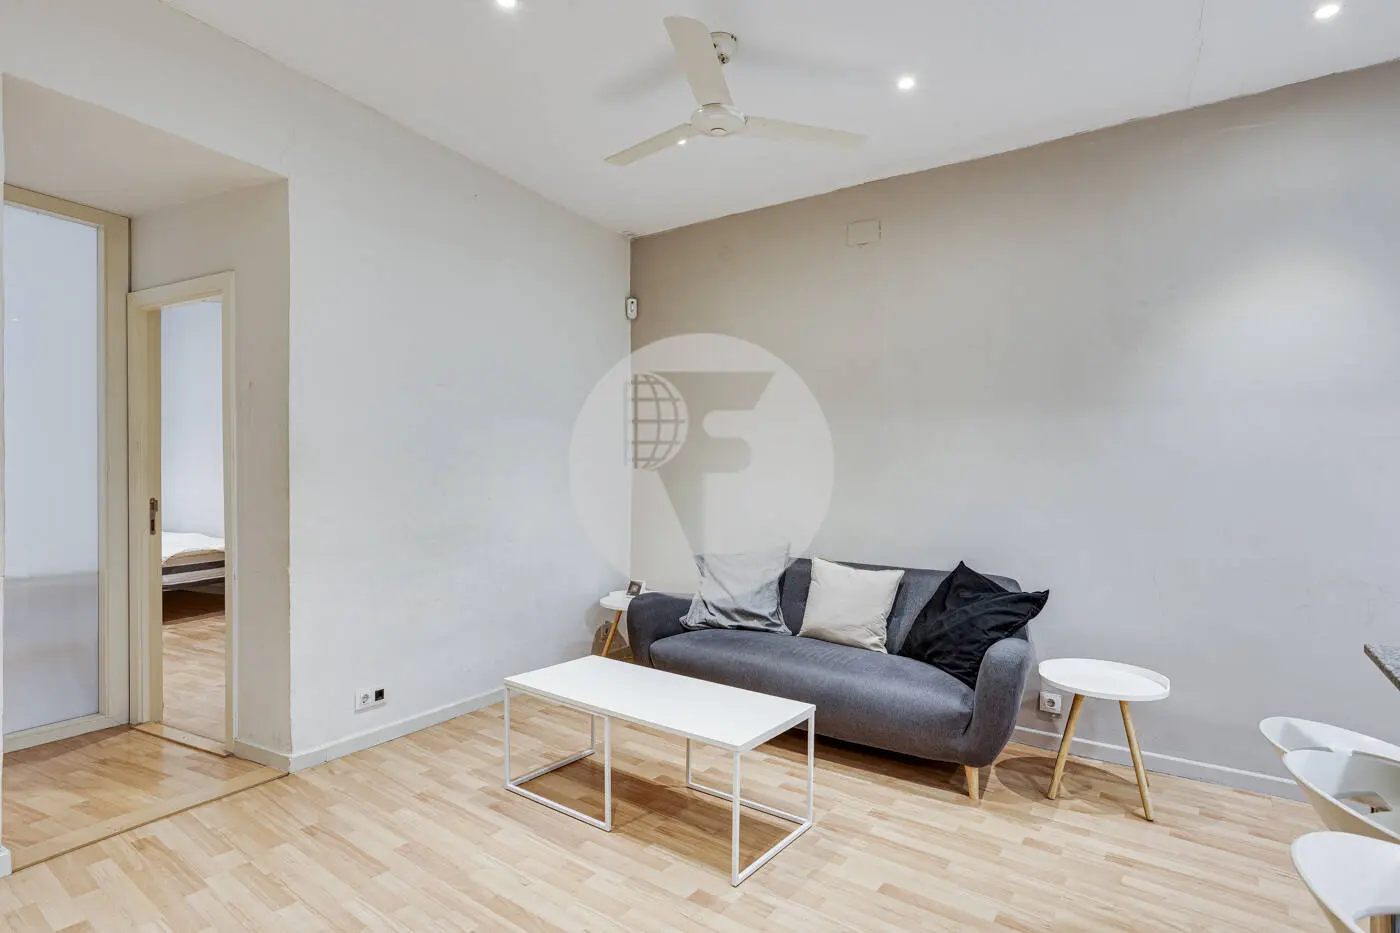 Magnificent apartment for sale next to Pl Universitat of 114m2 according to the land registry, located on Tallers Street in the Ciutat Vella neighborhood of Barcelona 5